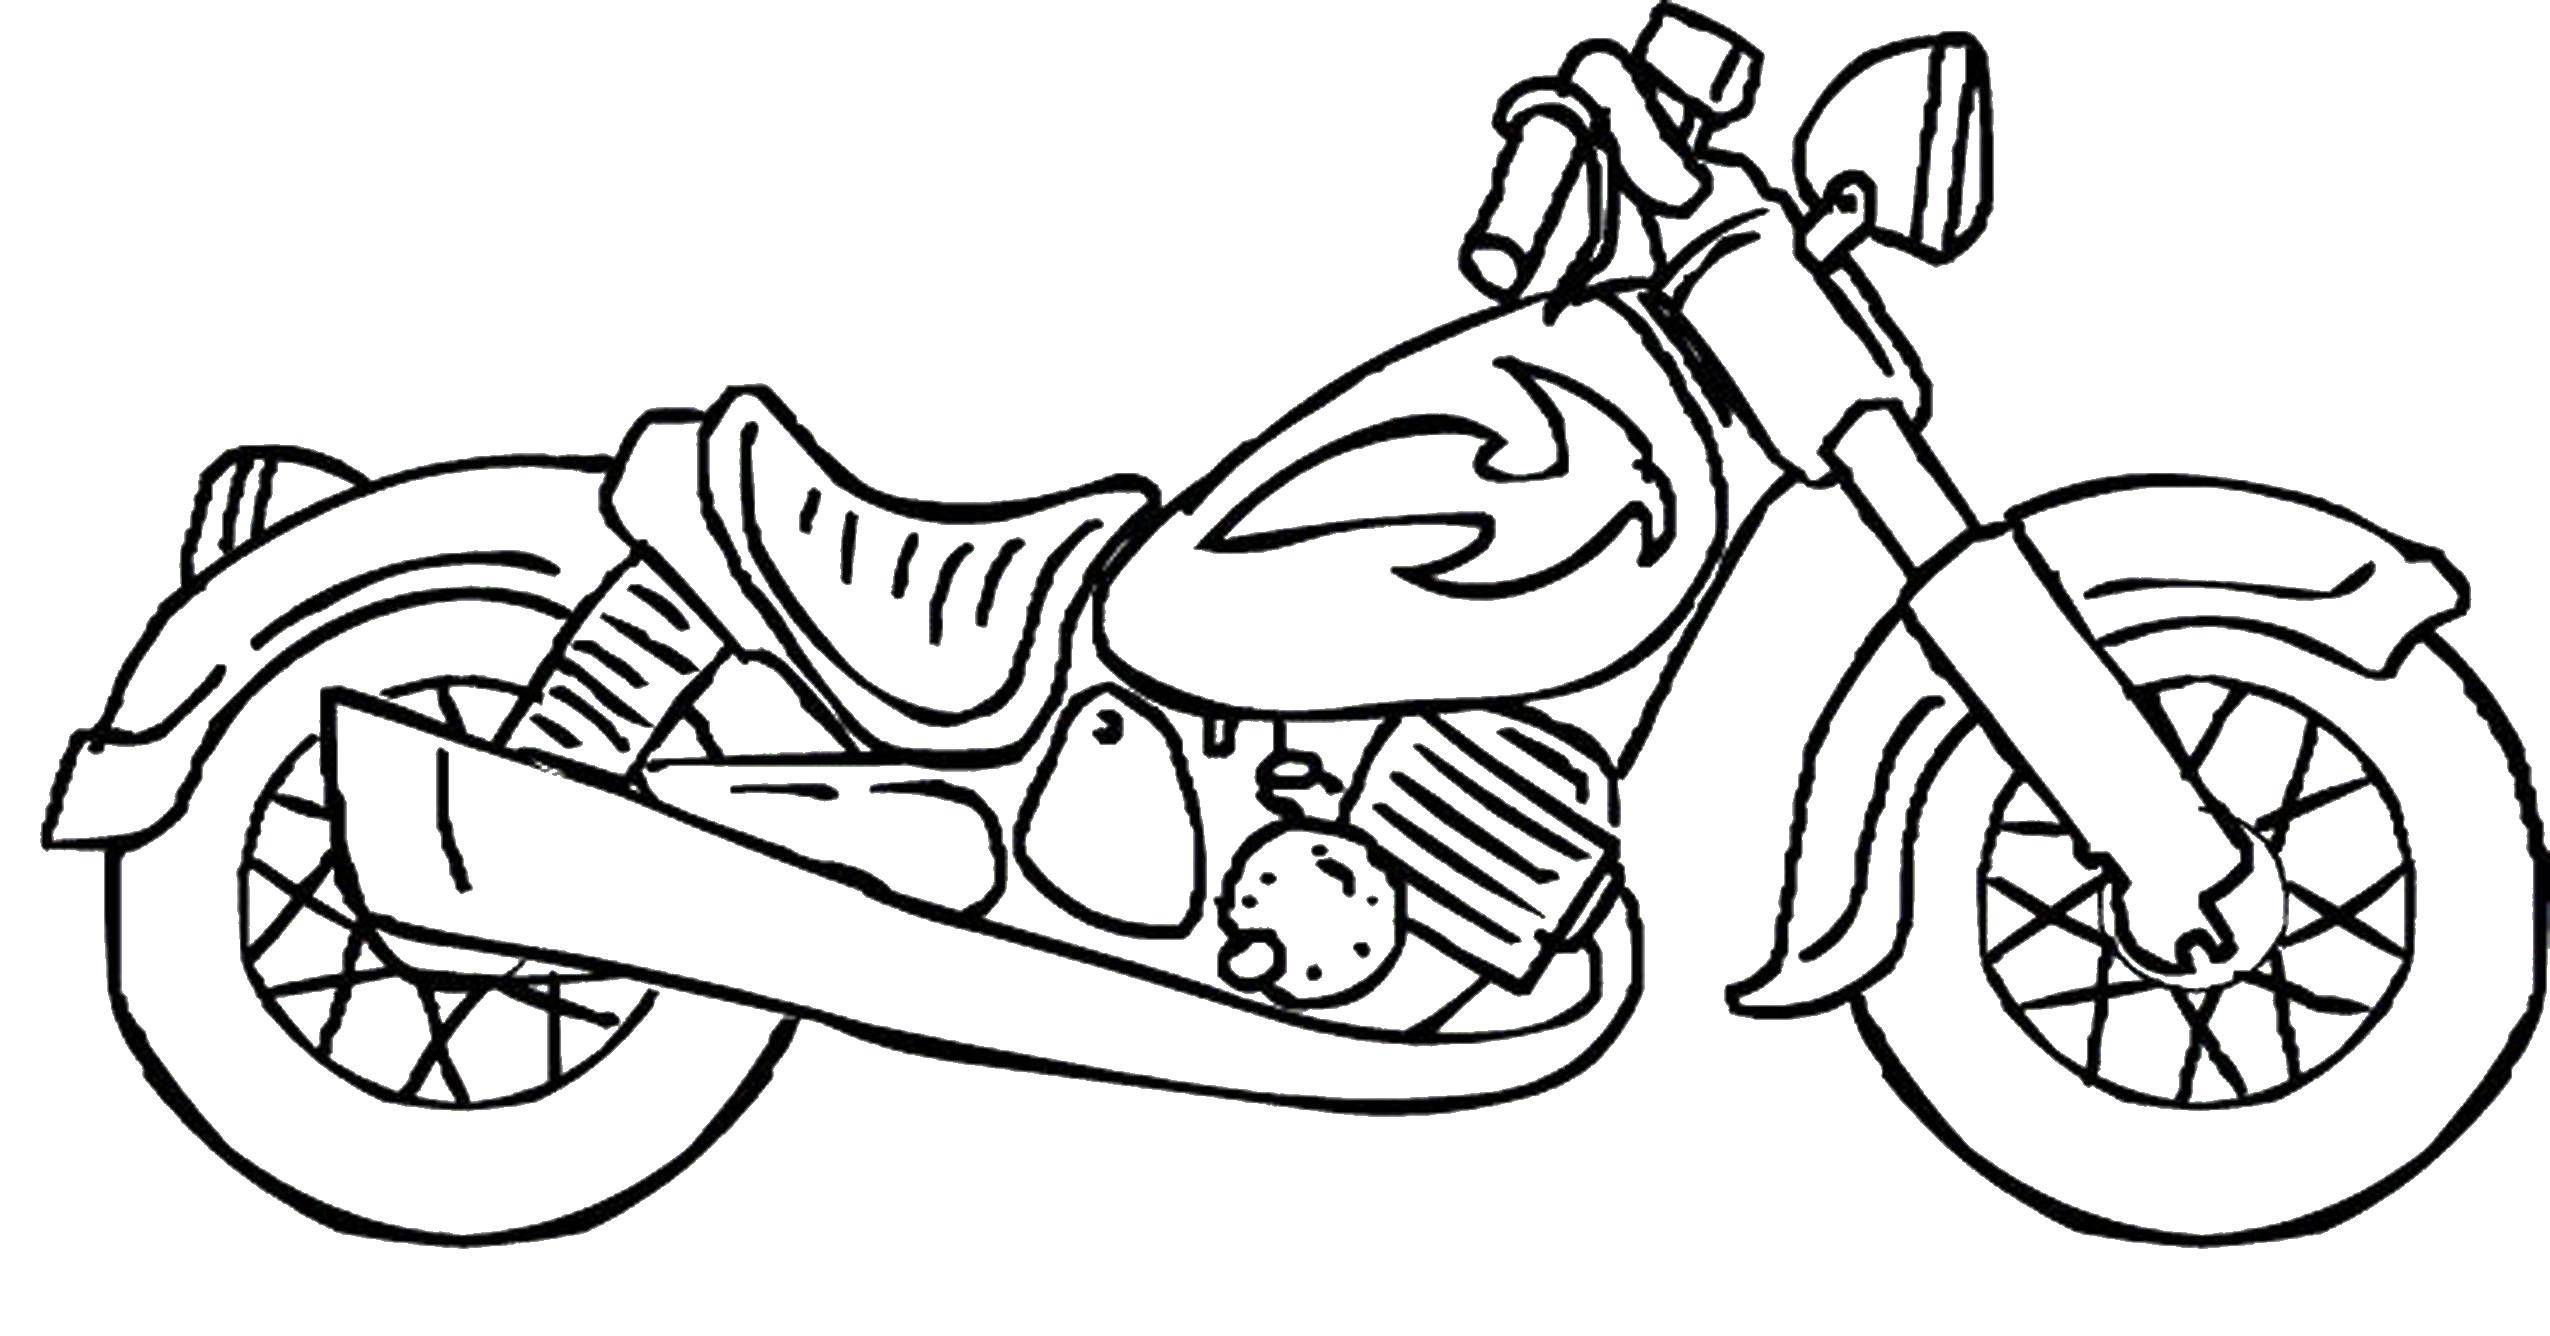 Coloring Biker motorcycle. Category transportation. Tags:  Transport, motorcycle.